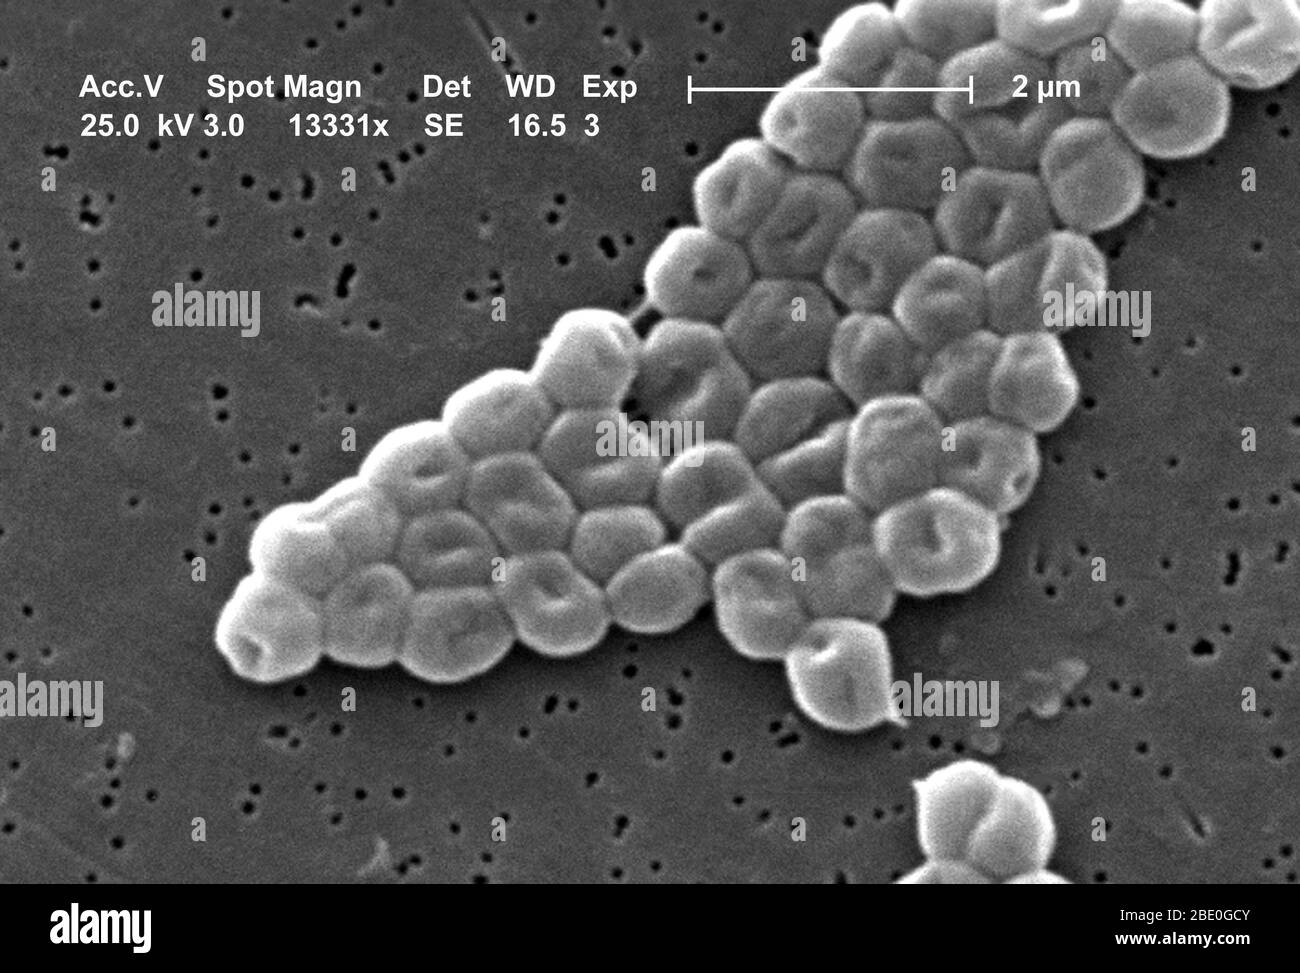 This SEM depicts a highly magnified cluster of Gram-negative, non-motile Acinetobacter baumannii bacteria; Mag - 13331x. Members of the genus Acinetobacter are nonmotile rods, 1-1.5µm in diameter, and 1.5-2.5µm in length, becoming spherical in shape while in their stationary phase of growth. Acinetobacter spp. are widely distributed in nature, and are normal flora on the skin. Some members of the genus are important because they are an emerging cause of hospital acquired pulmonary, i.e., pneumoniae, hemopathic, and wound infections. Stock Photo